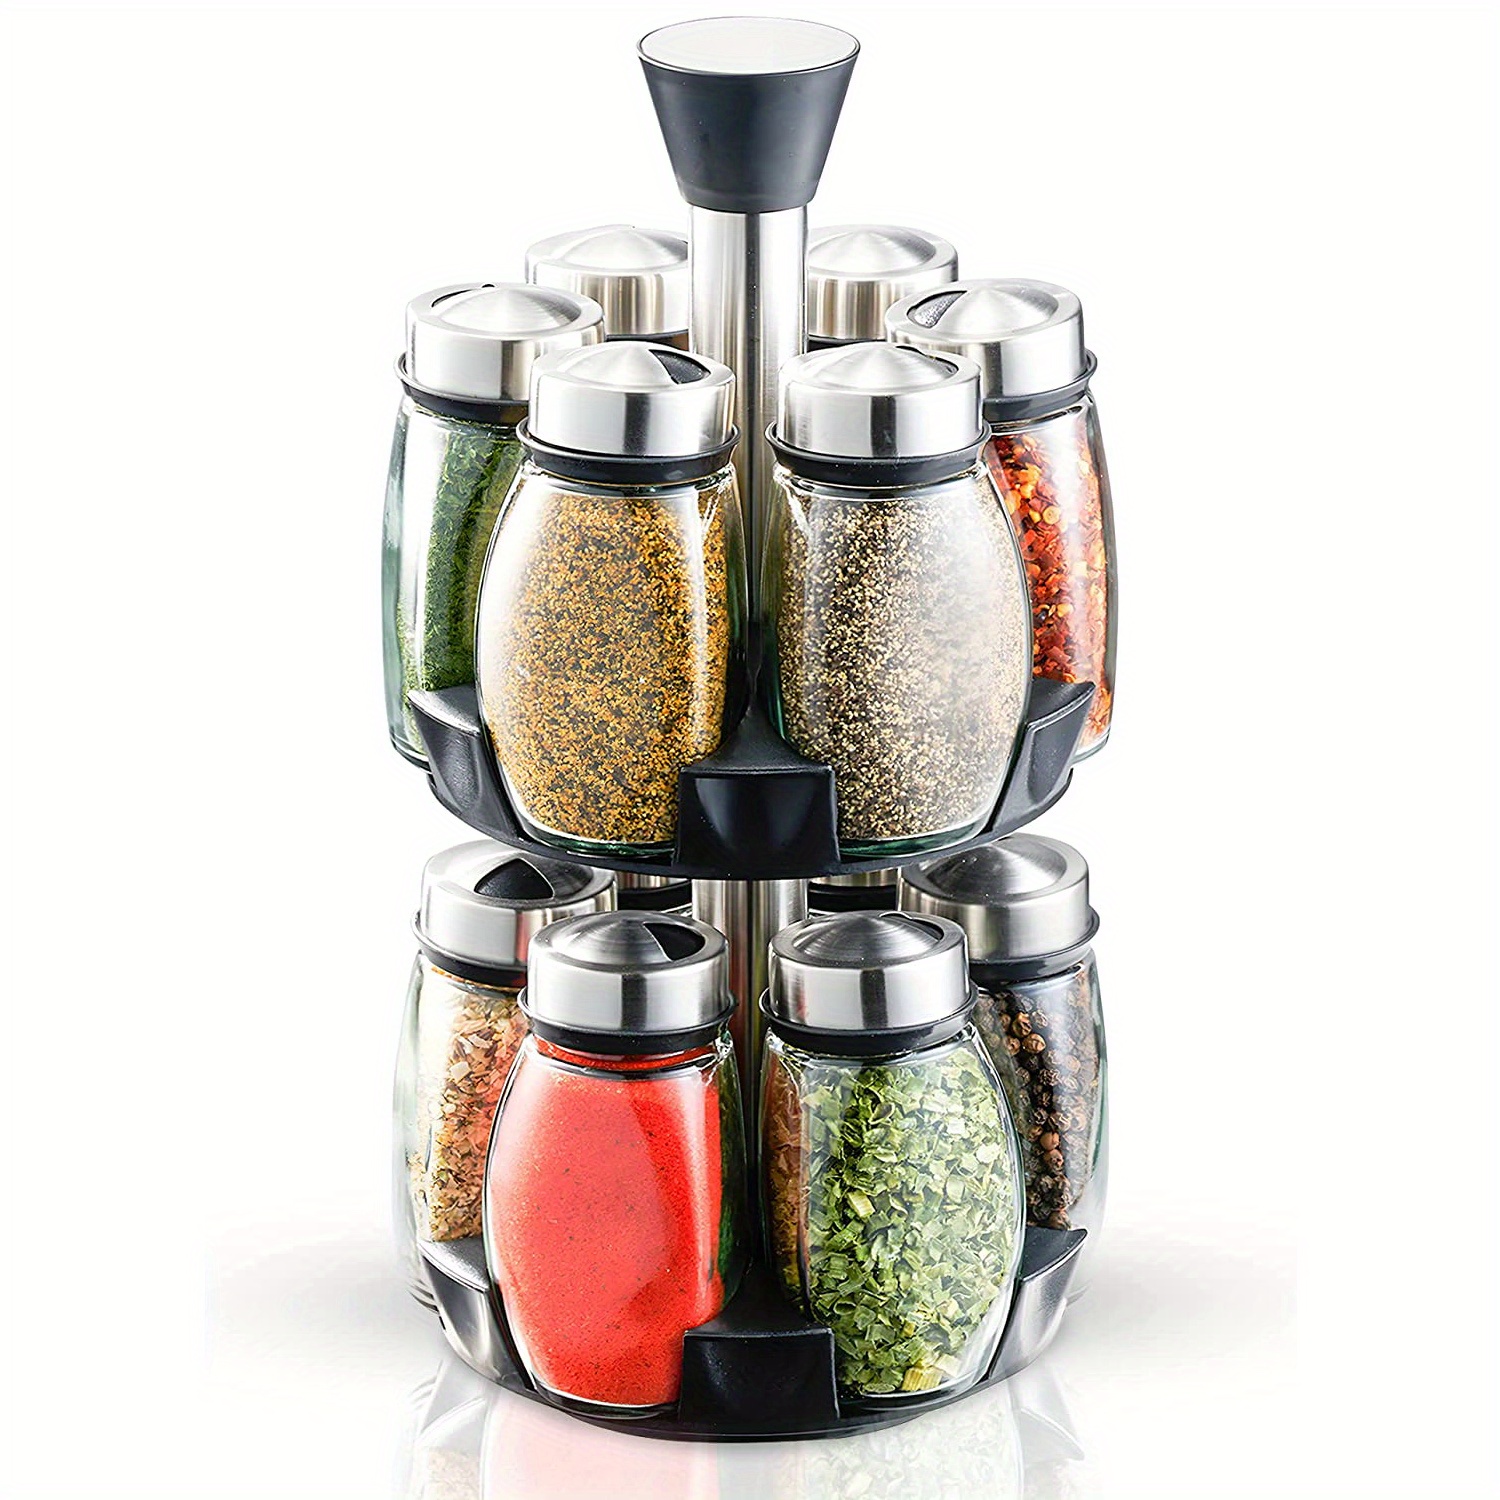 1set Revolving Spice Rack, 6-Jar Seasoning Organizer Holder 360° Rotation  Shelf Tower Set with 6 Glass Spice Refill Containers Jars for Cabinet